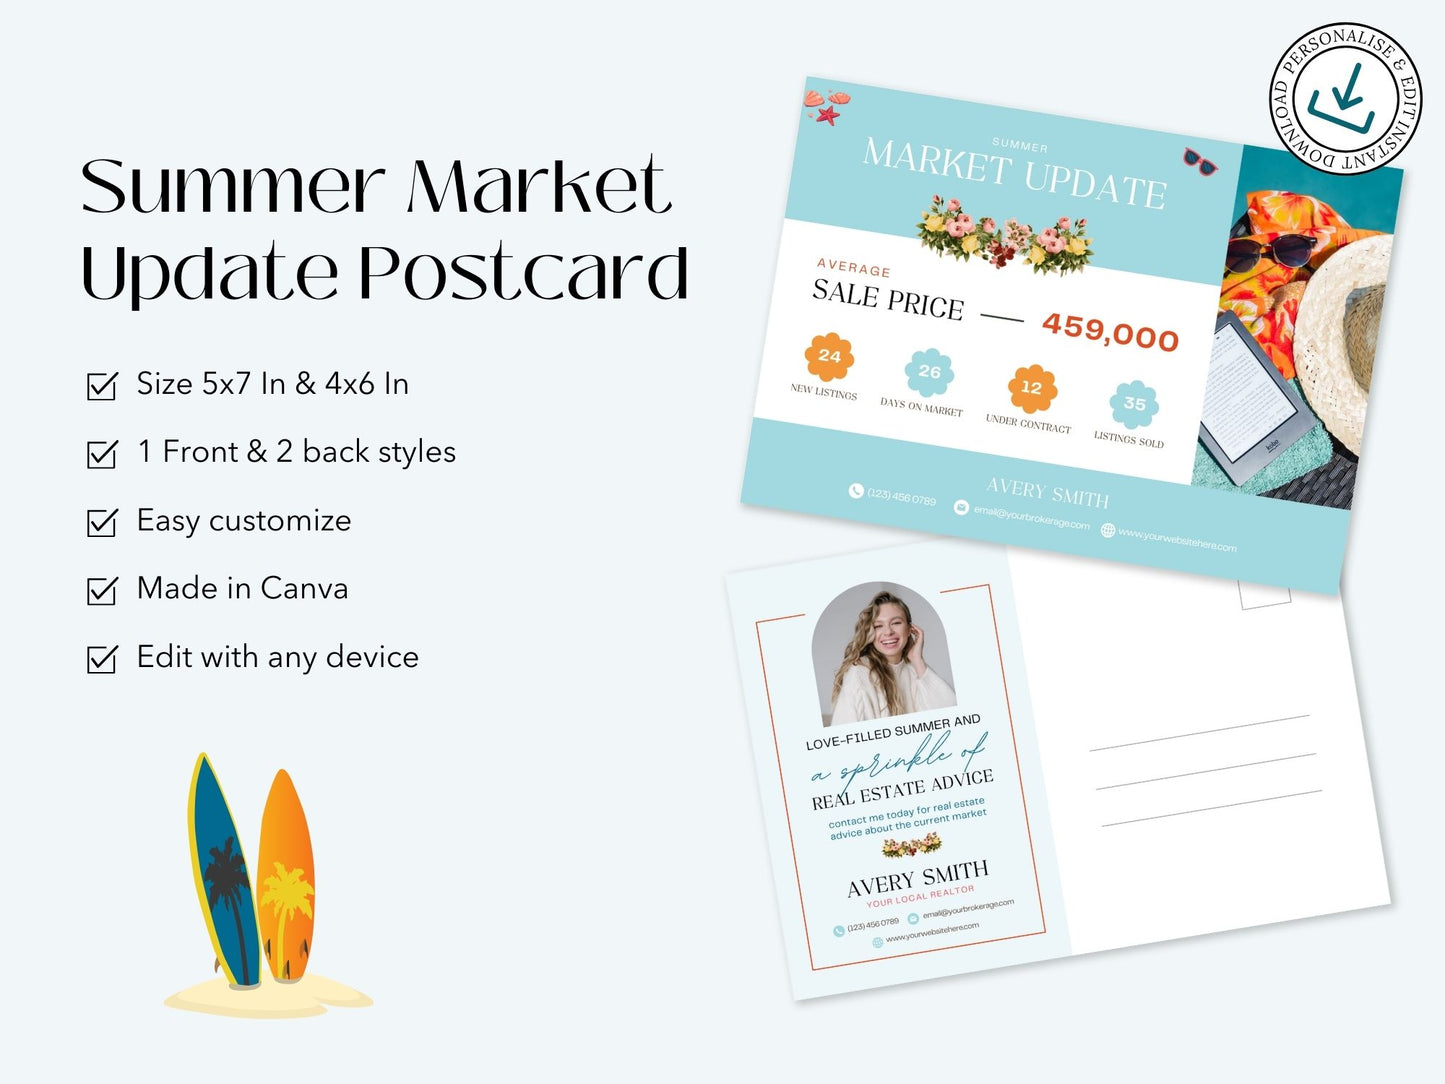 Summer Market Update Postcard - Stay informed with valuable insights into the summer real estate market.